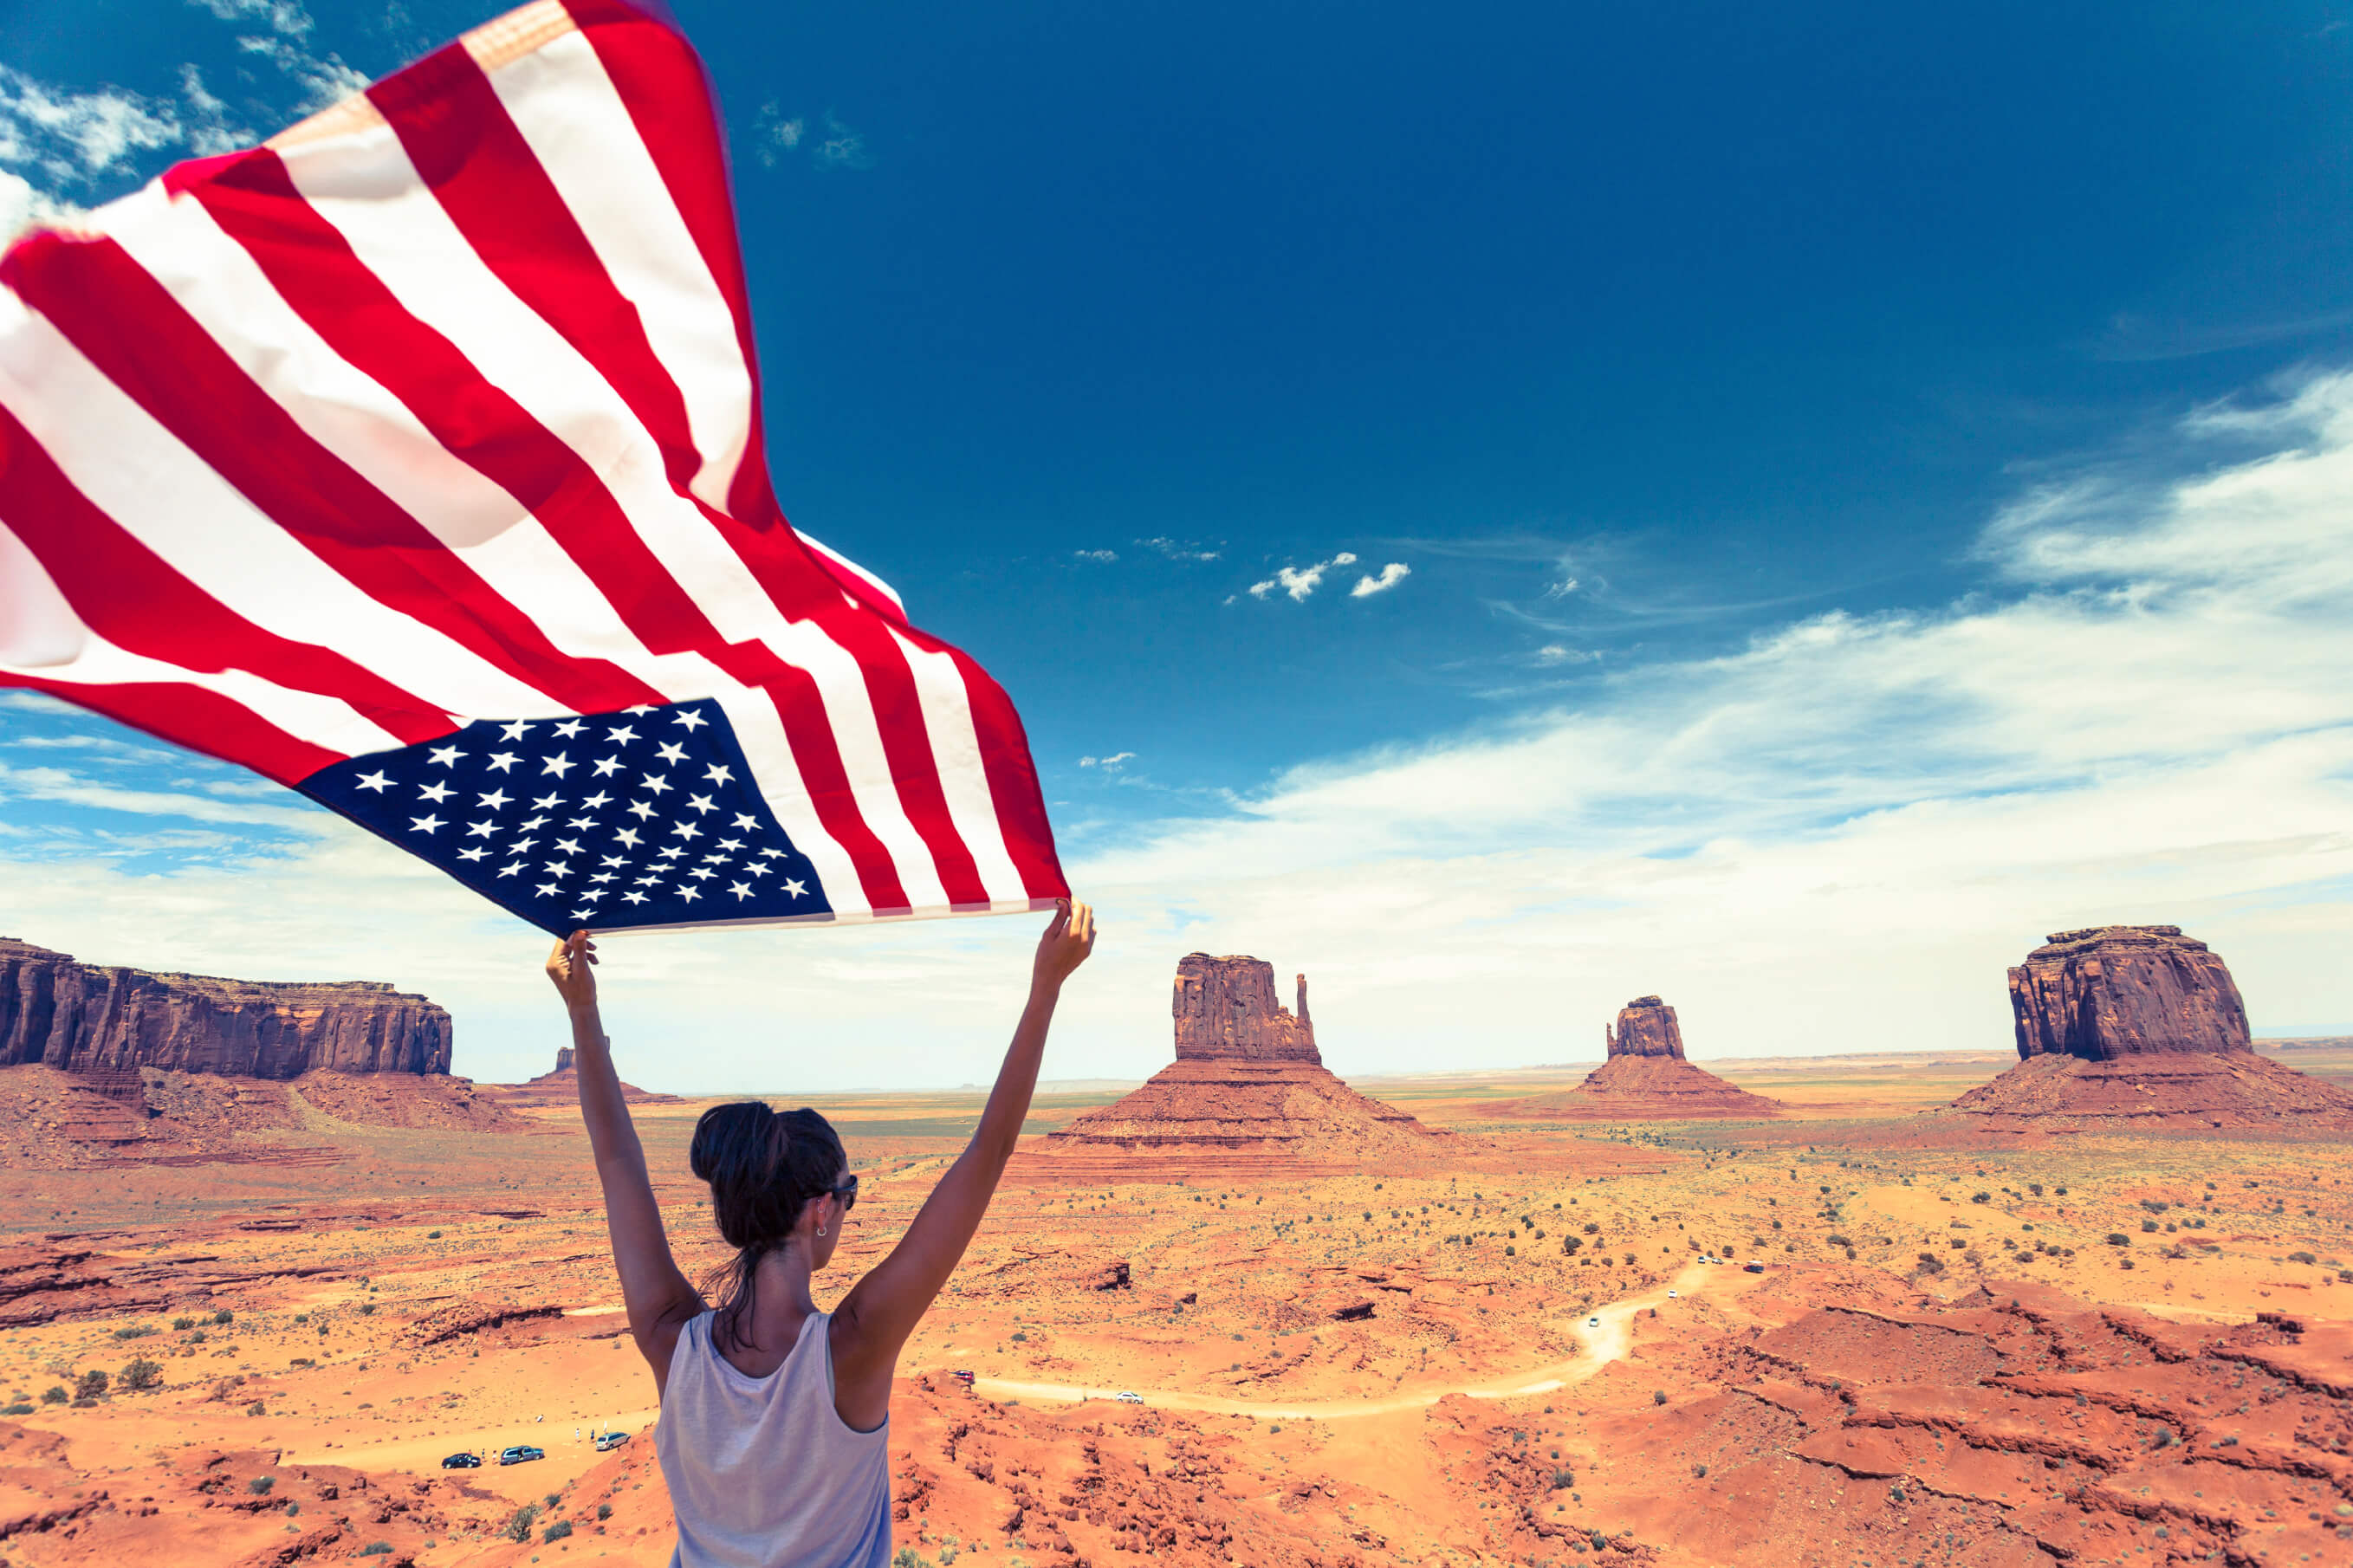 Woman in the desert holding an American flag